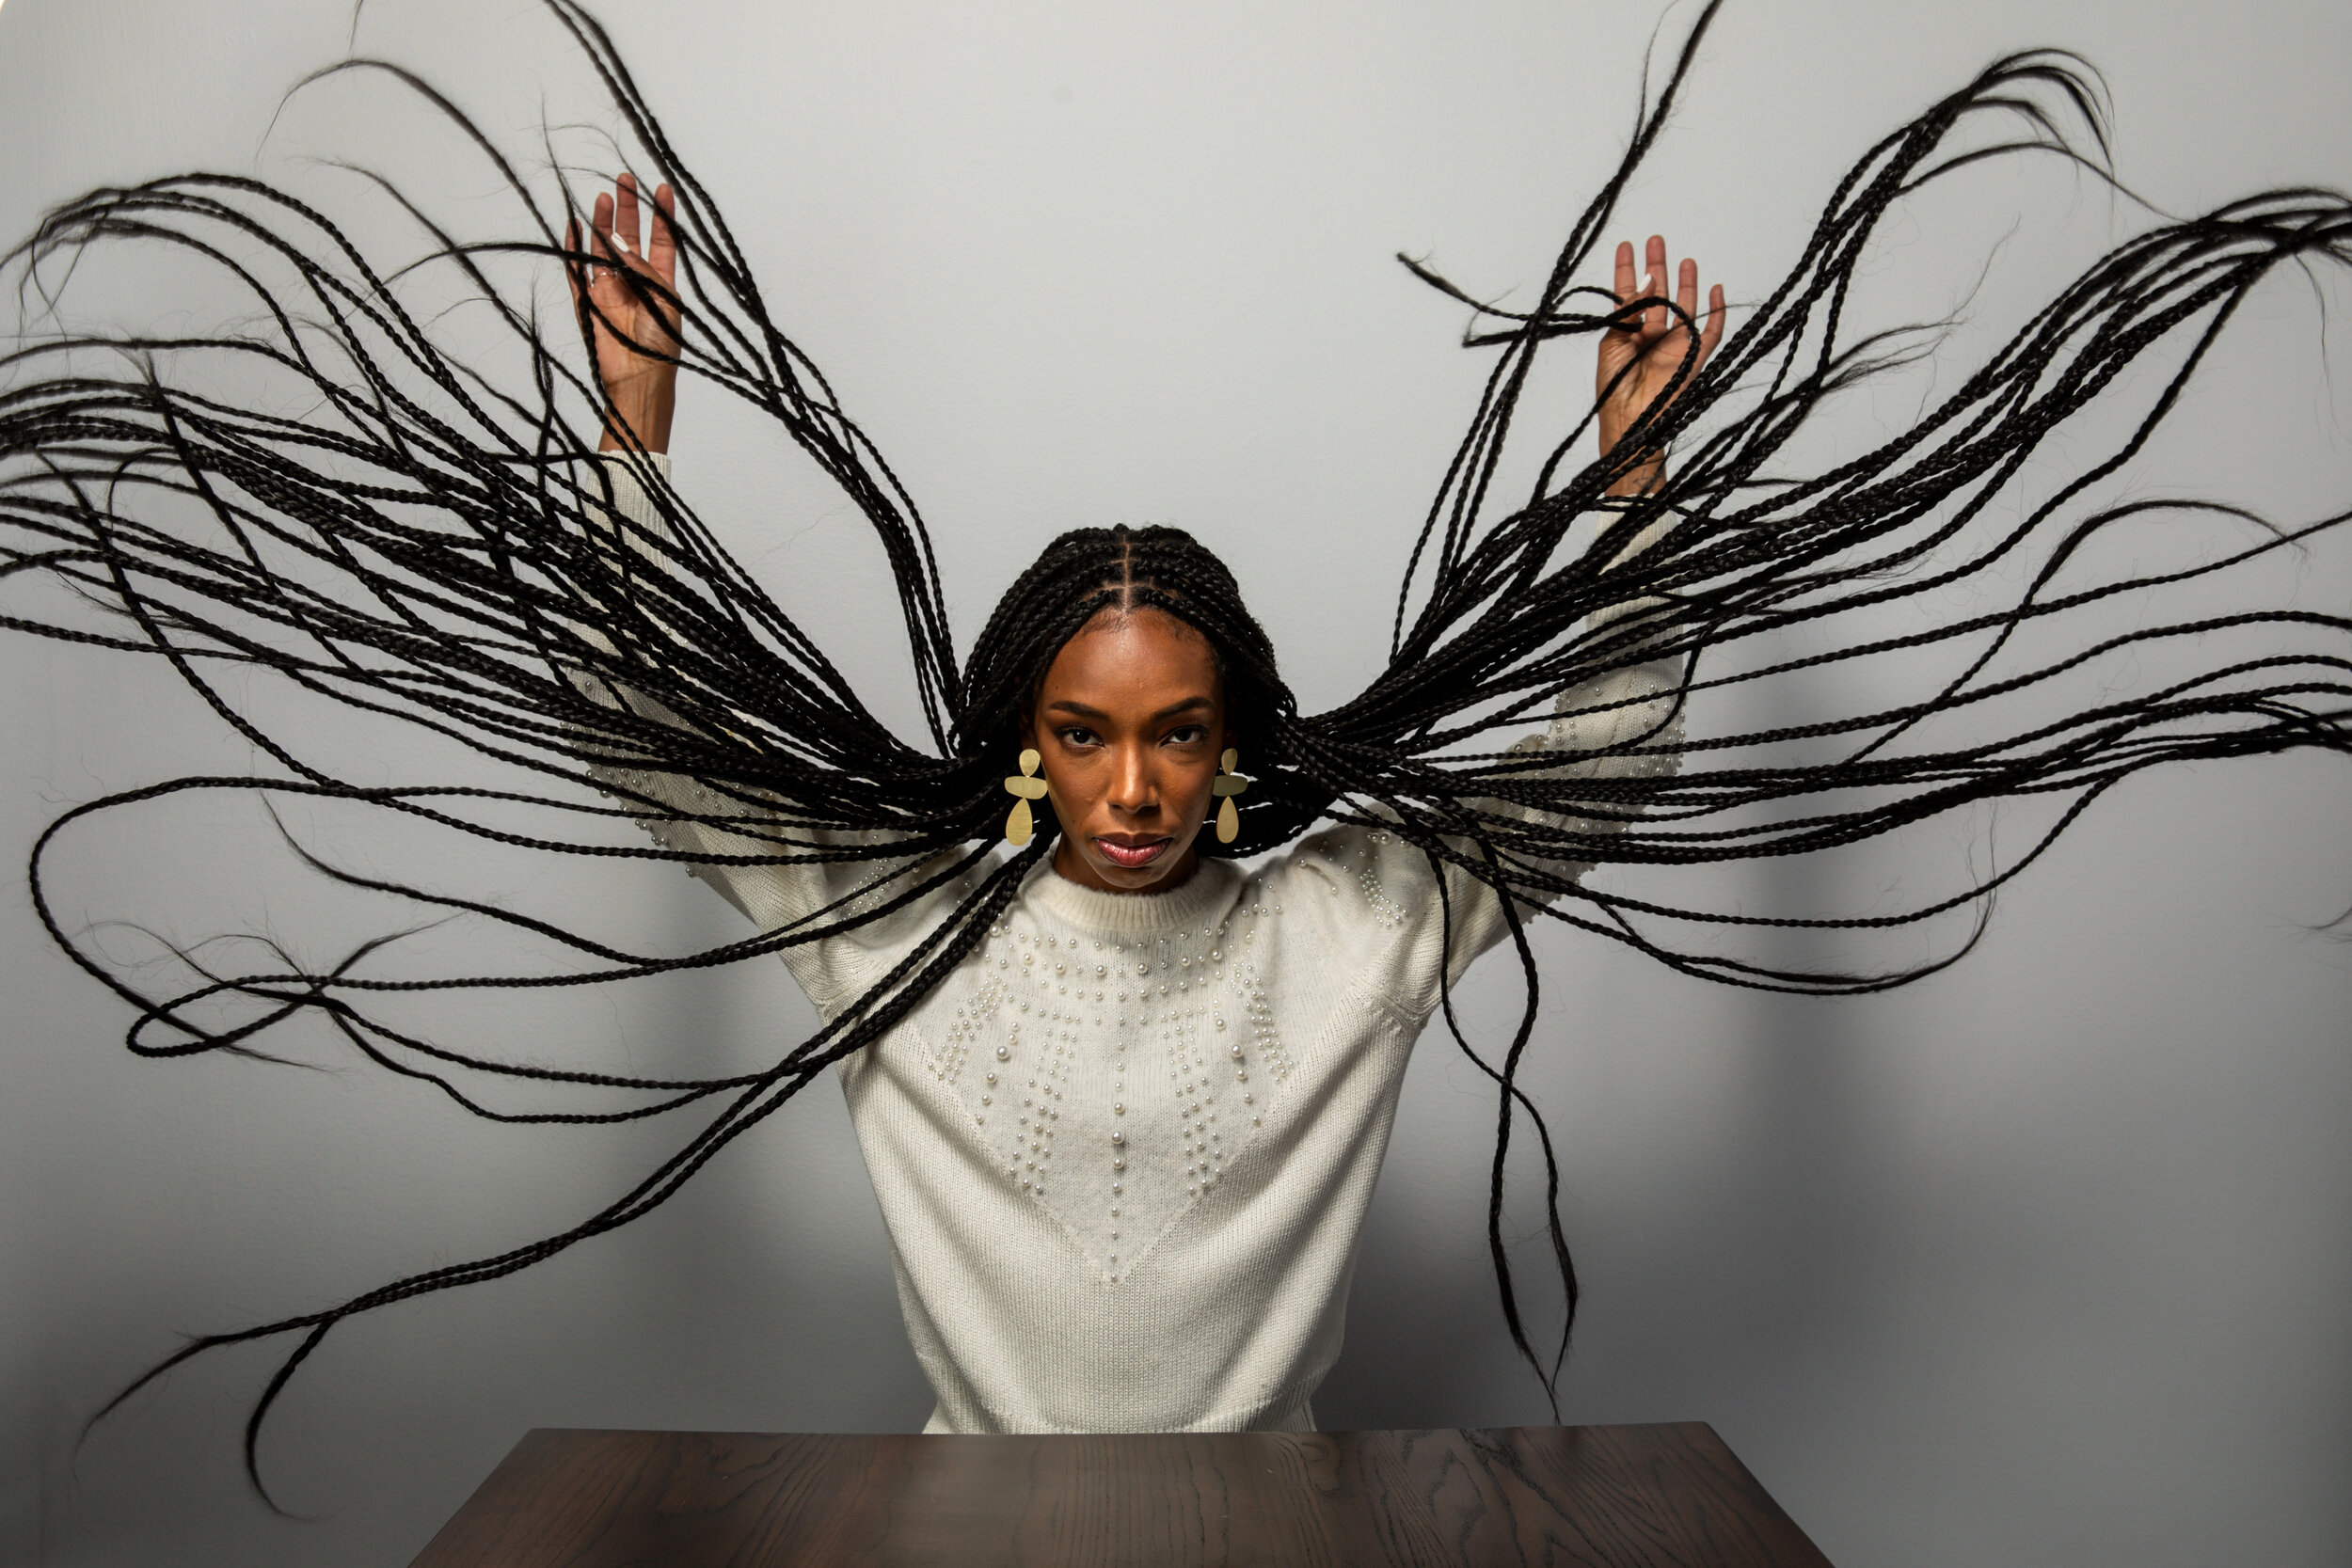  "Elle's bad hair" A portrait of actress Elle Lorraine from the film, “Bad Hair,” photographed at the Sundance Film Festival on Friday, Jan. 24, 2020 in Park City, Utah. Lorraine's character is an ambitious woman who gets a hair weave to fit into an 